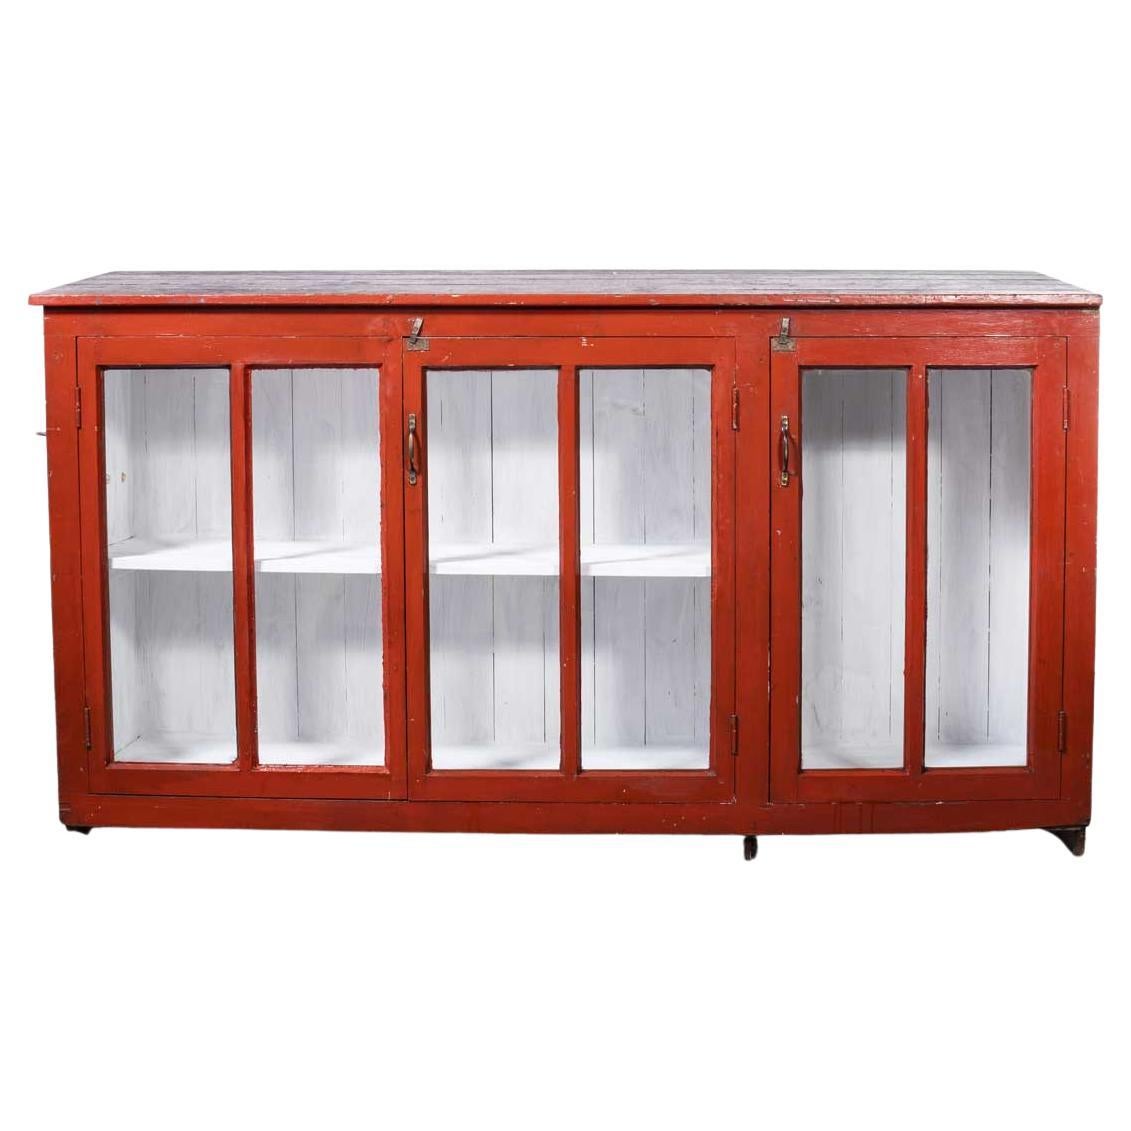 1960's Large Firemans Hall Storage Cupboard For Sale